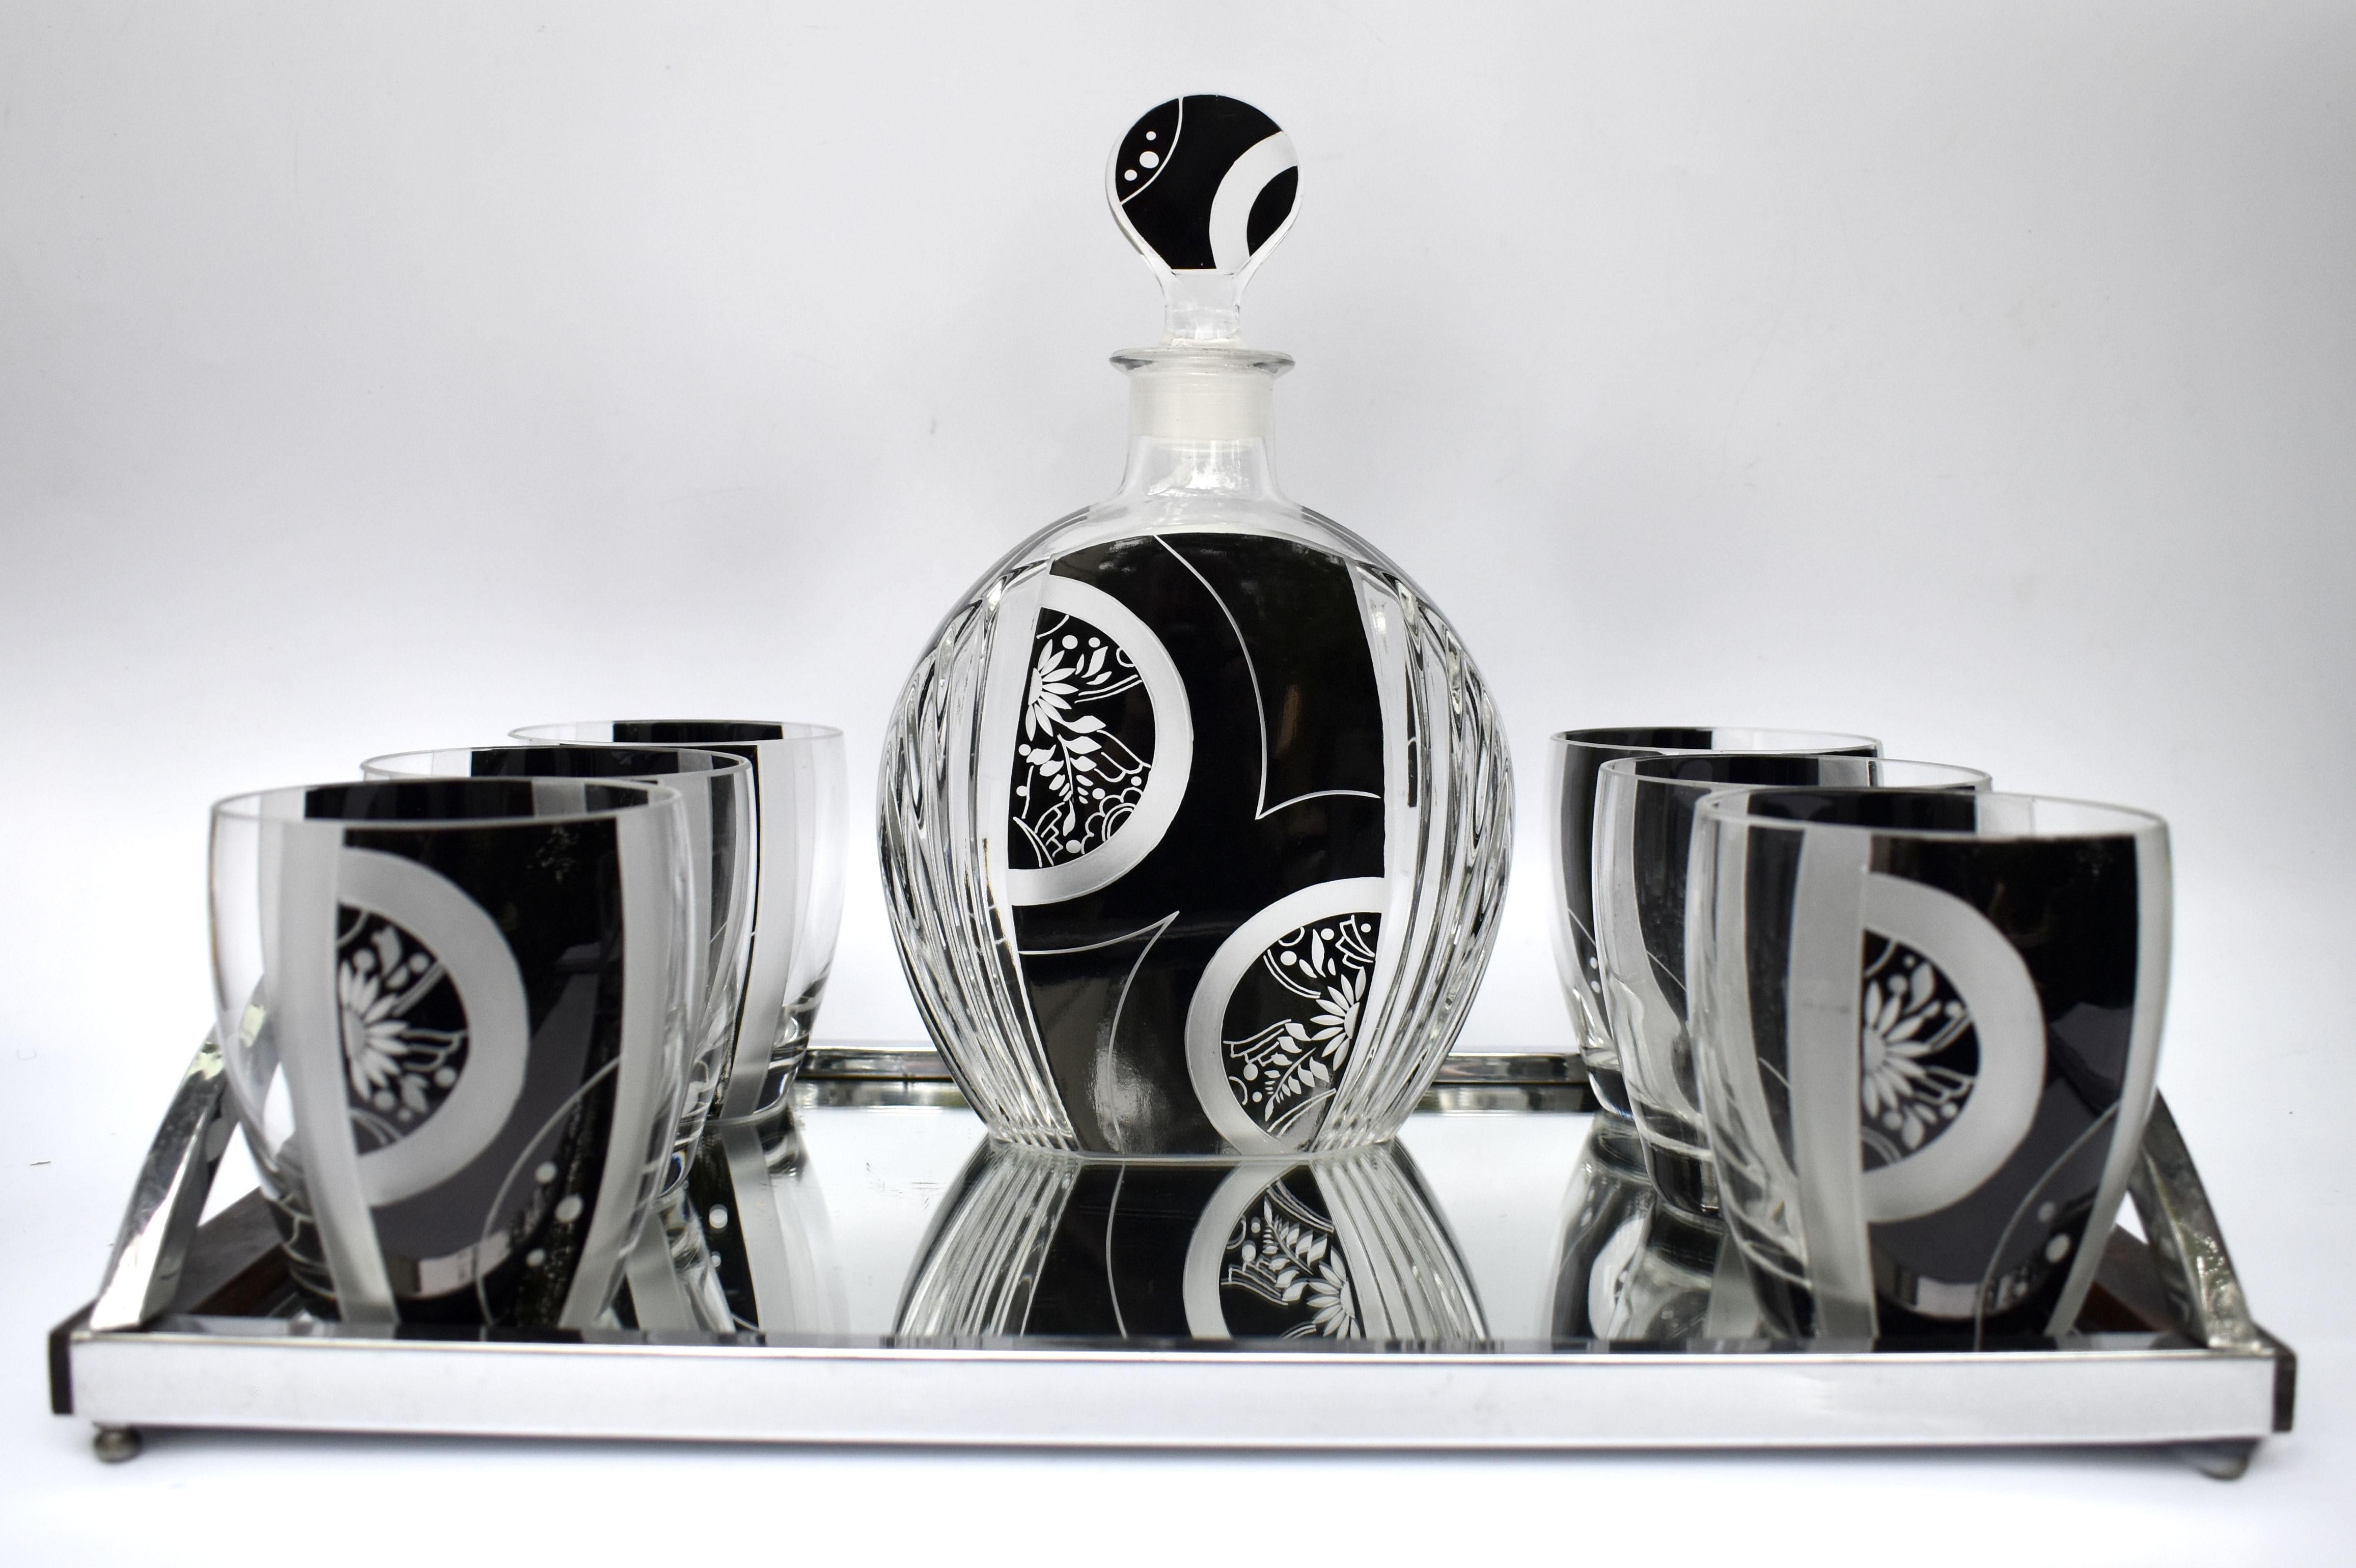 Extremely stylish Art Deco decanter set dating to the 1930's and originating from Prague, Czech Republic. Geometric enamelling in black decorates the attractive and stunning shape glasses & decanter. Comprises decanter with stopper and 6 glasses.